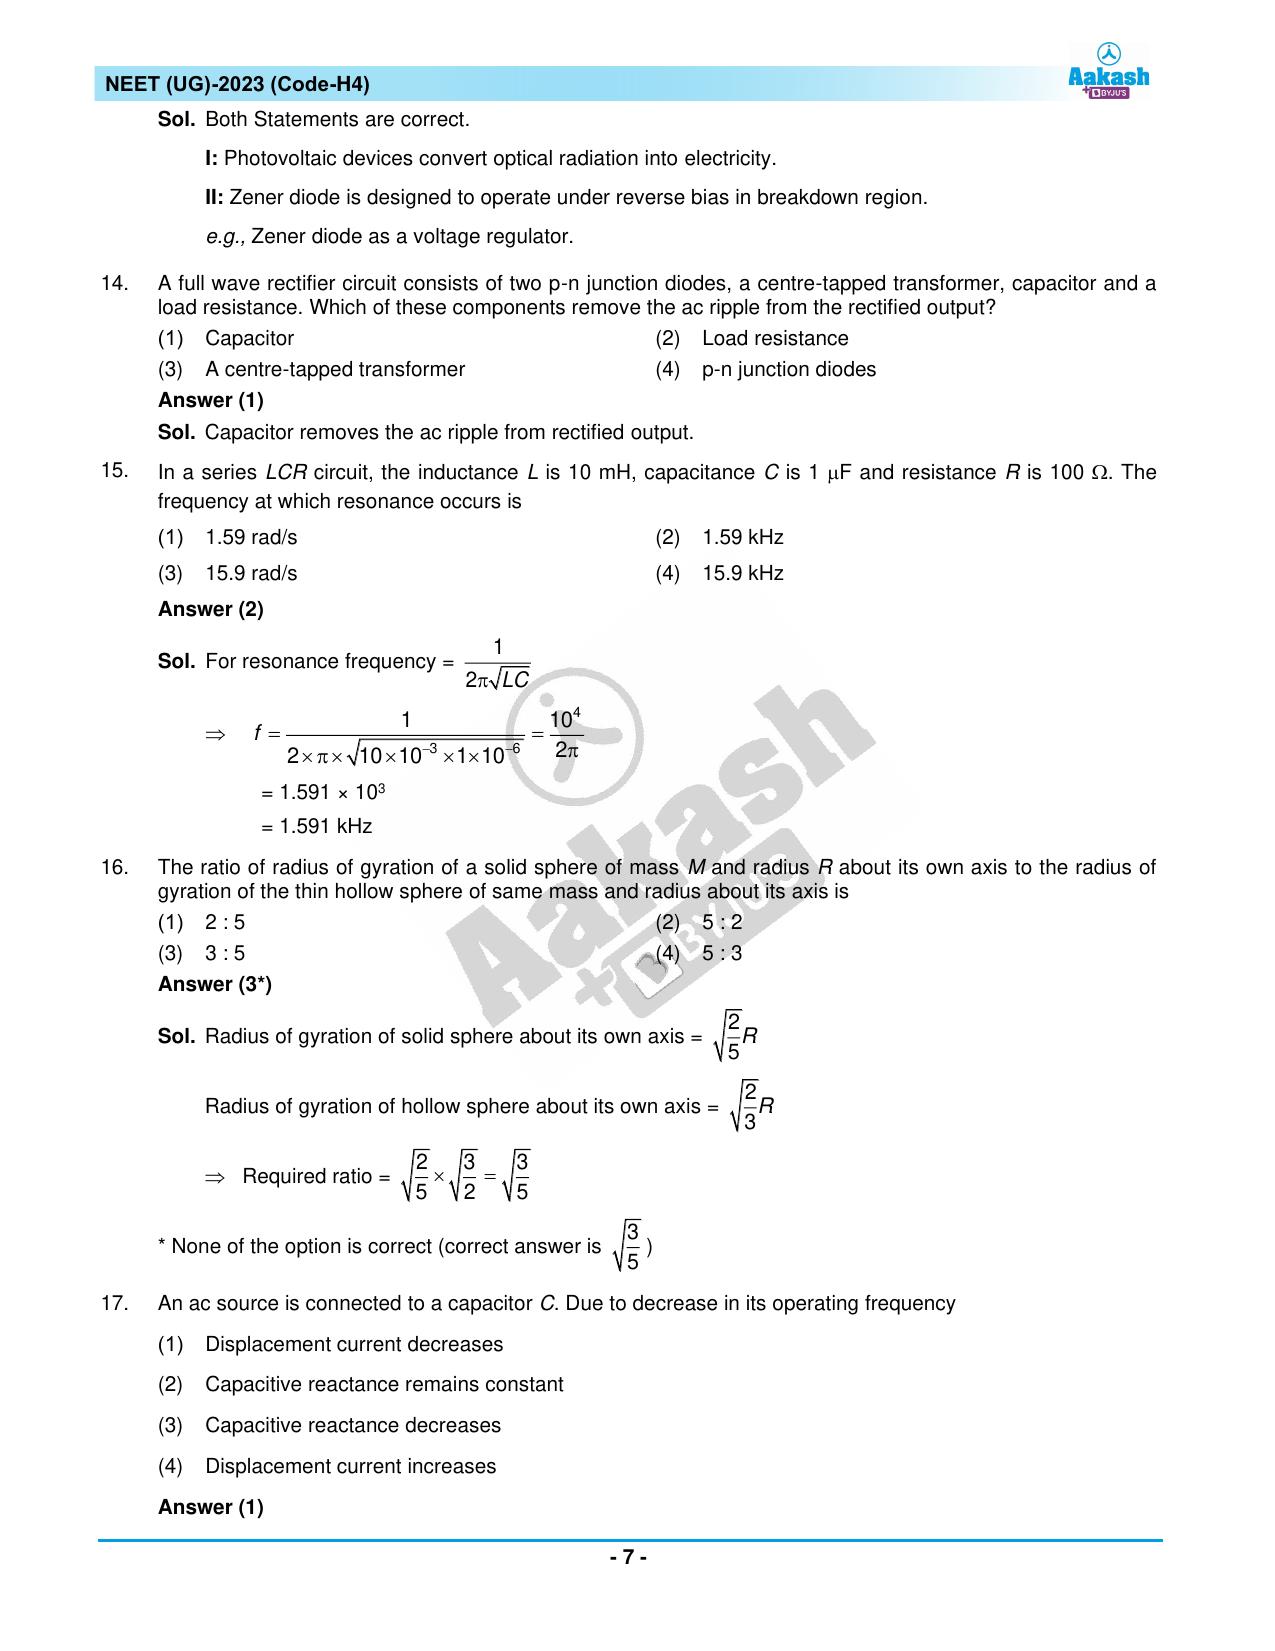 NEET 2023 Question Paper H4 - Page 7